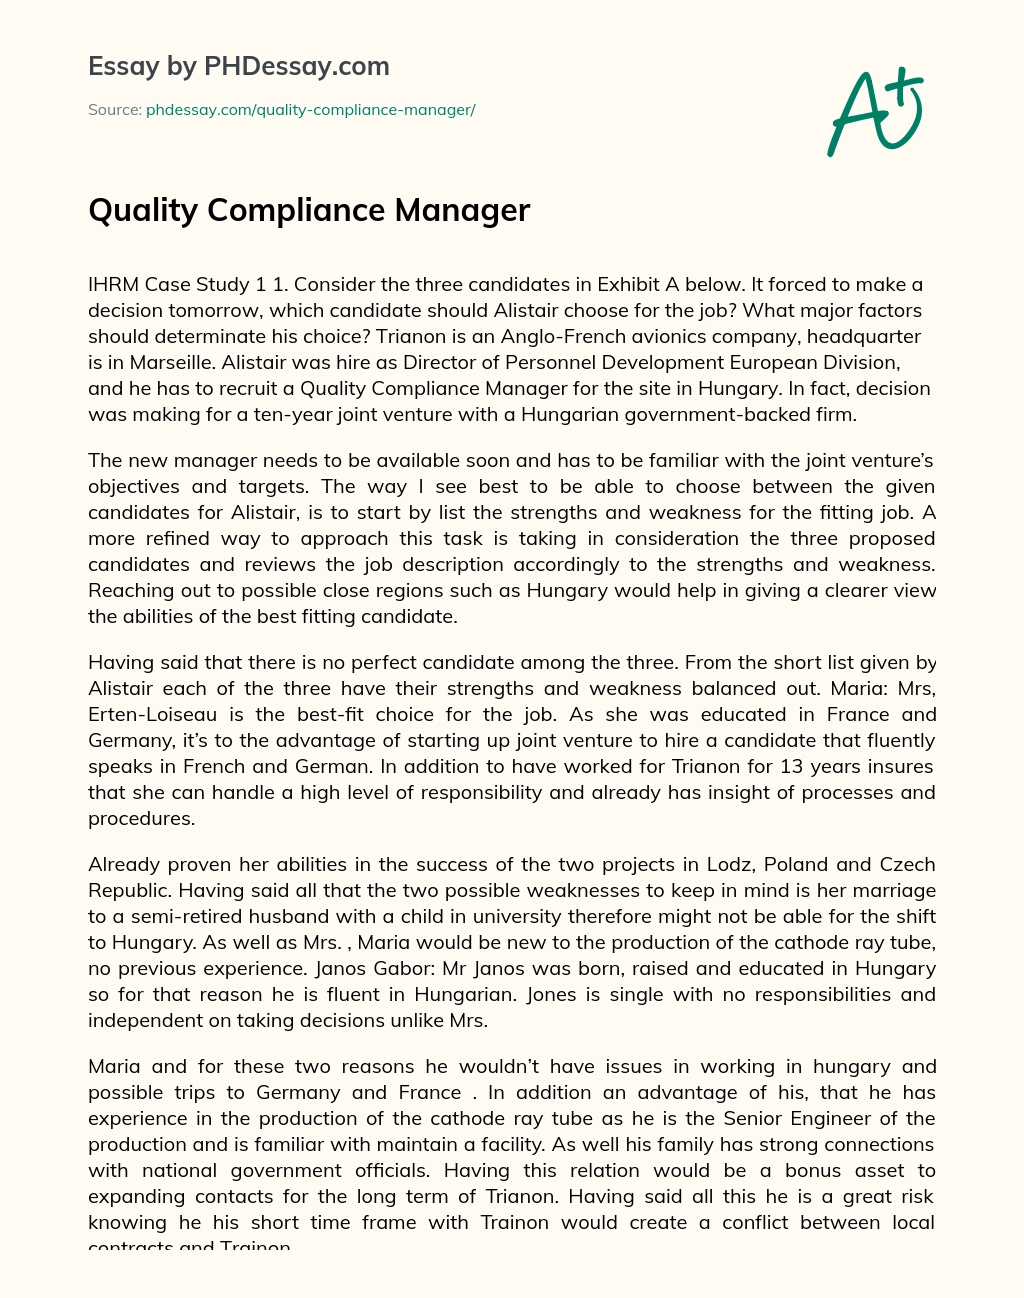 Quality Compliance Manager essay